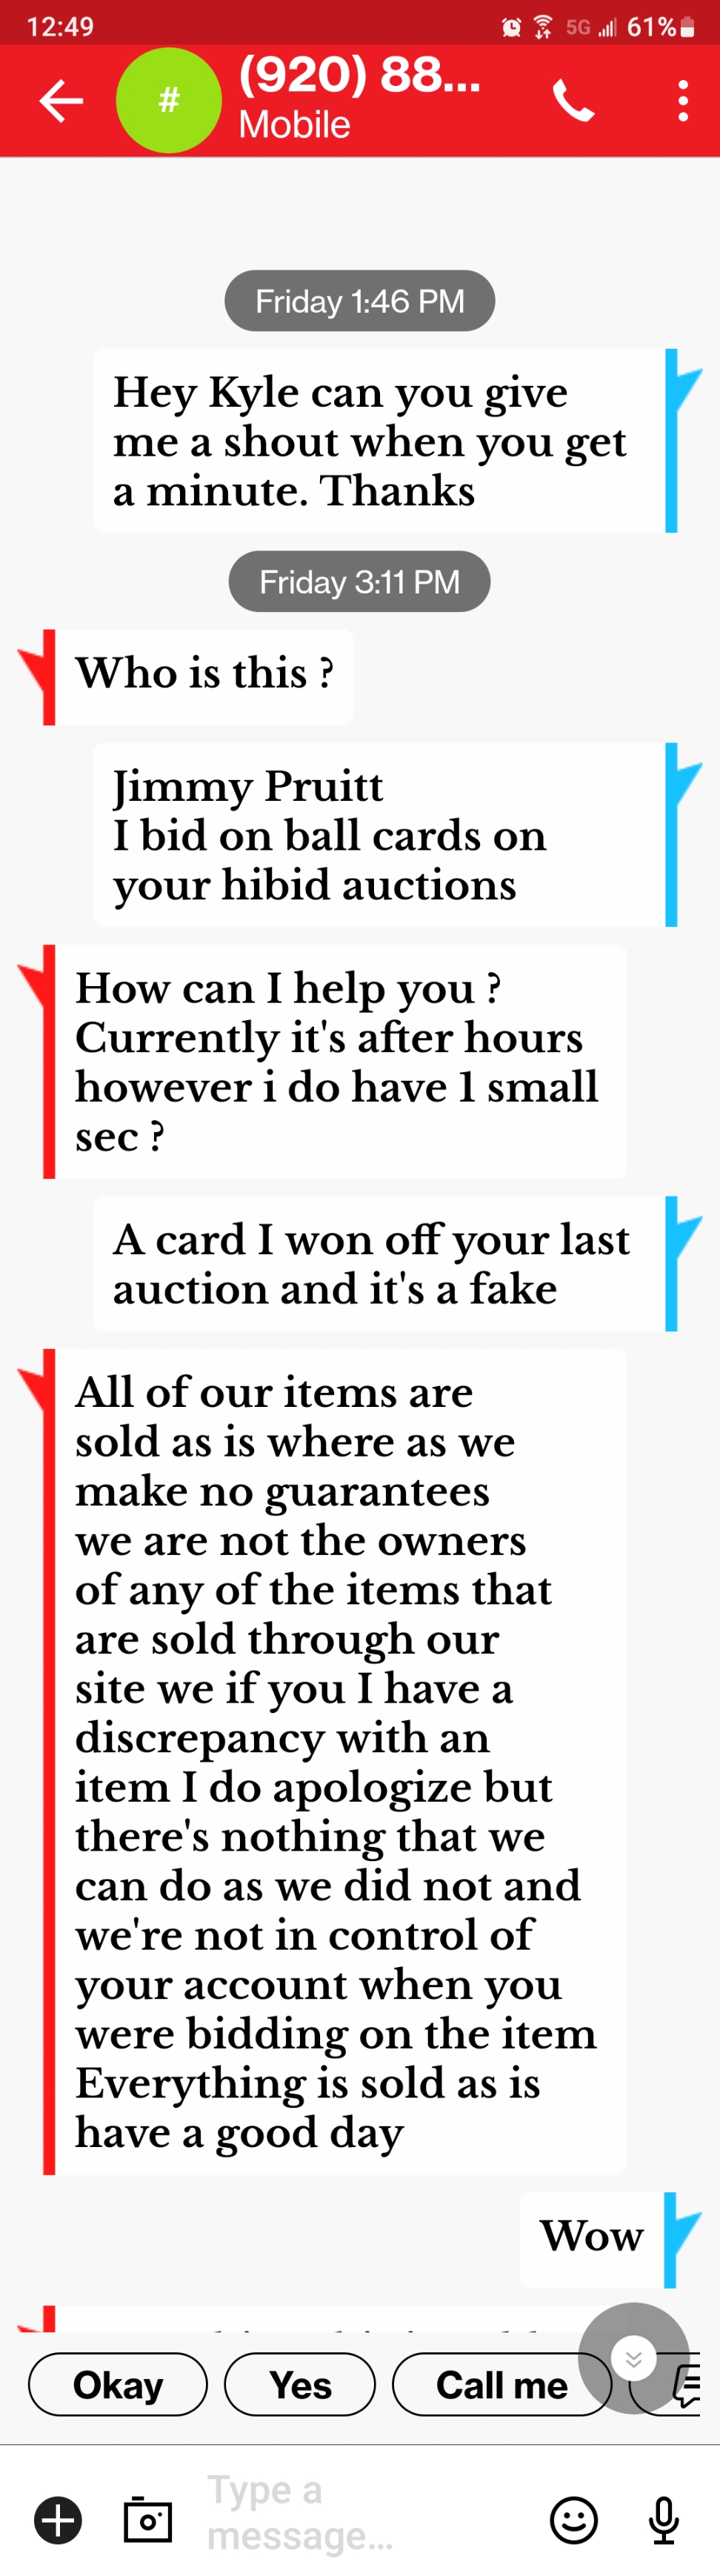 No concern for selling fake cards